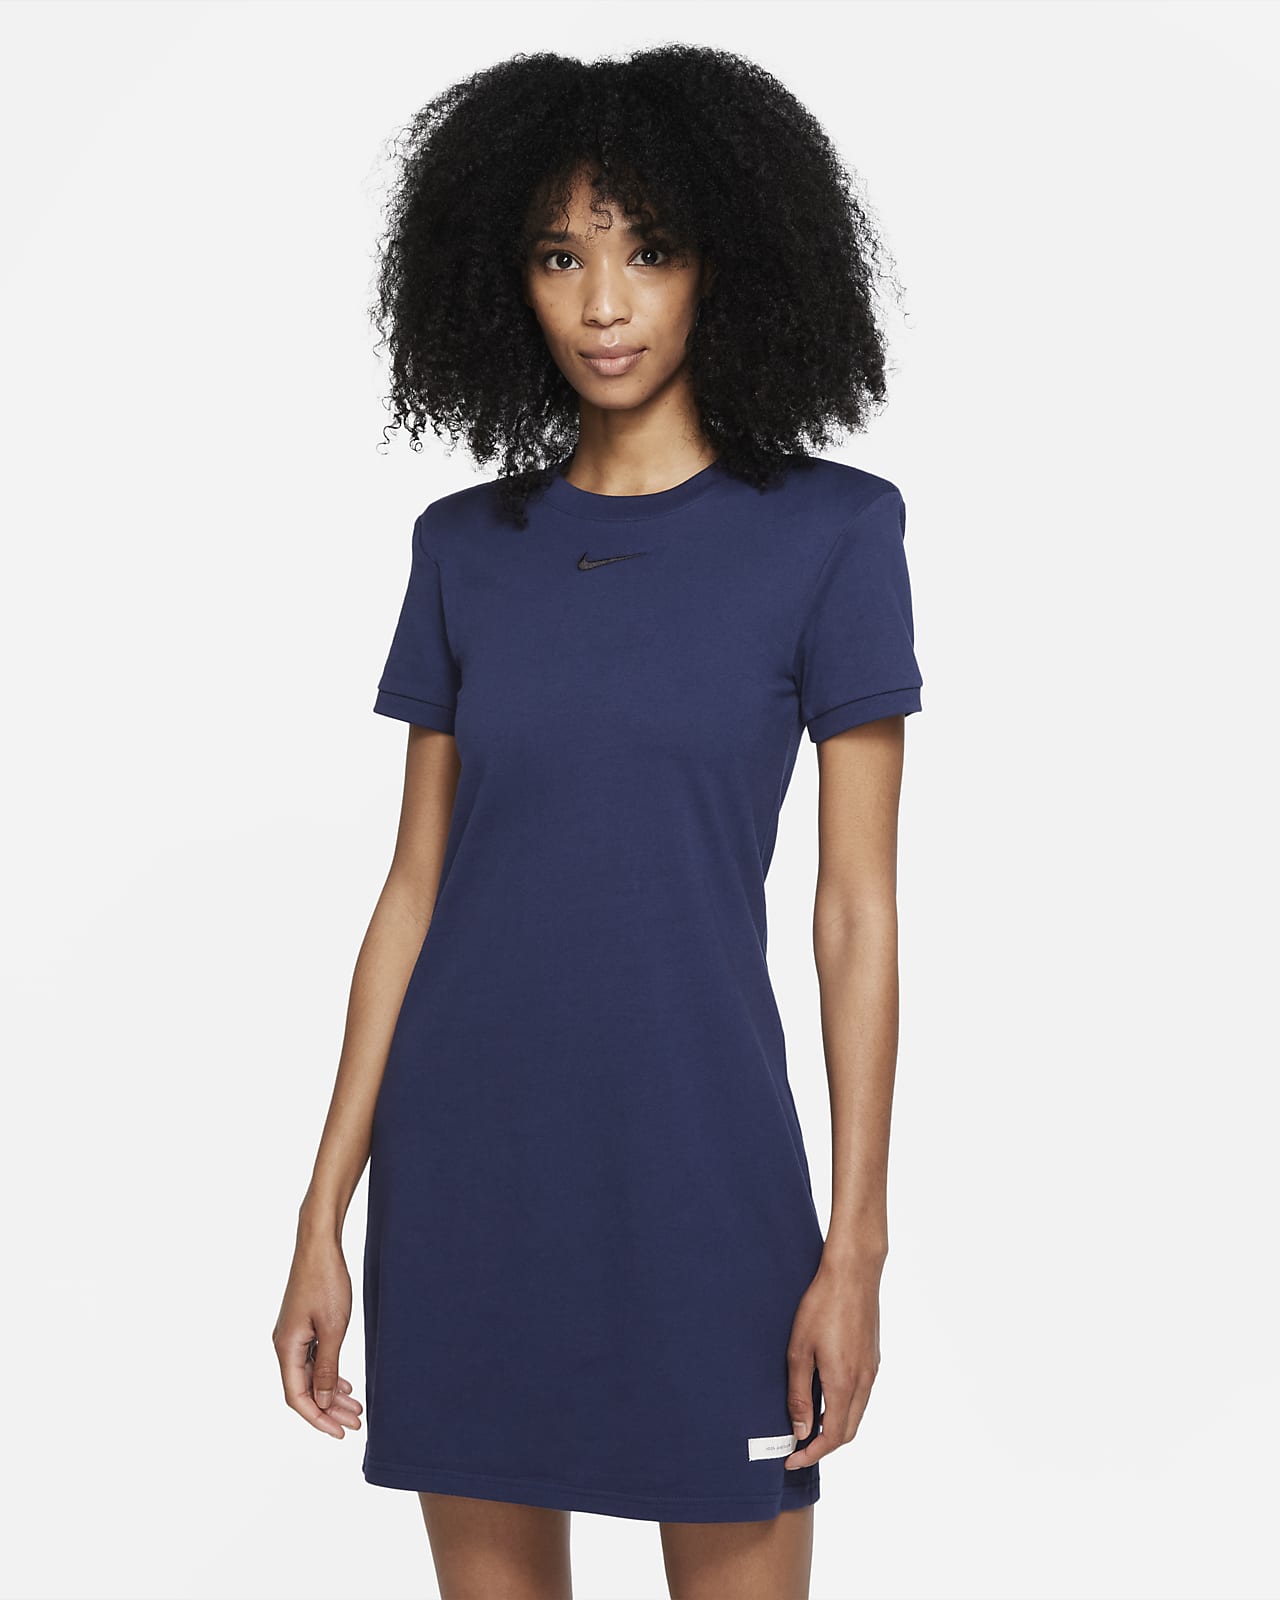 french connection womens crew neck short sleeves sweaterdress - walmartcom on women's short sleeve sweater dress